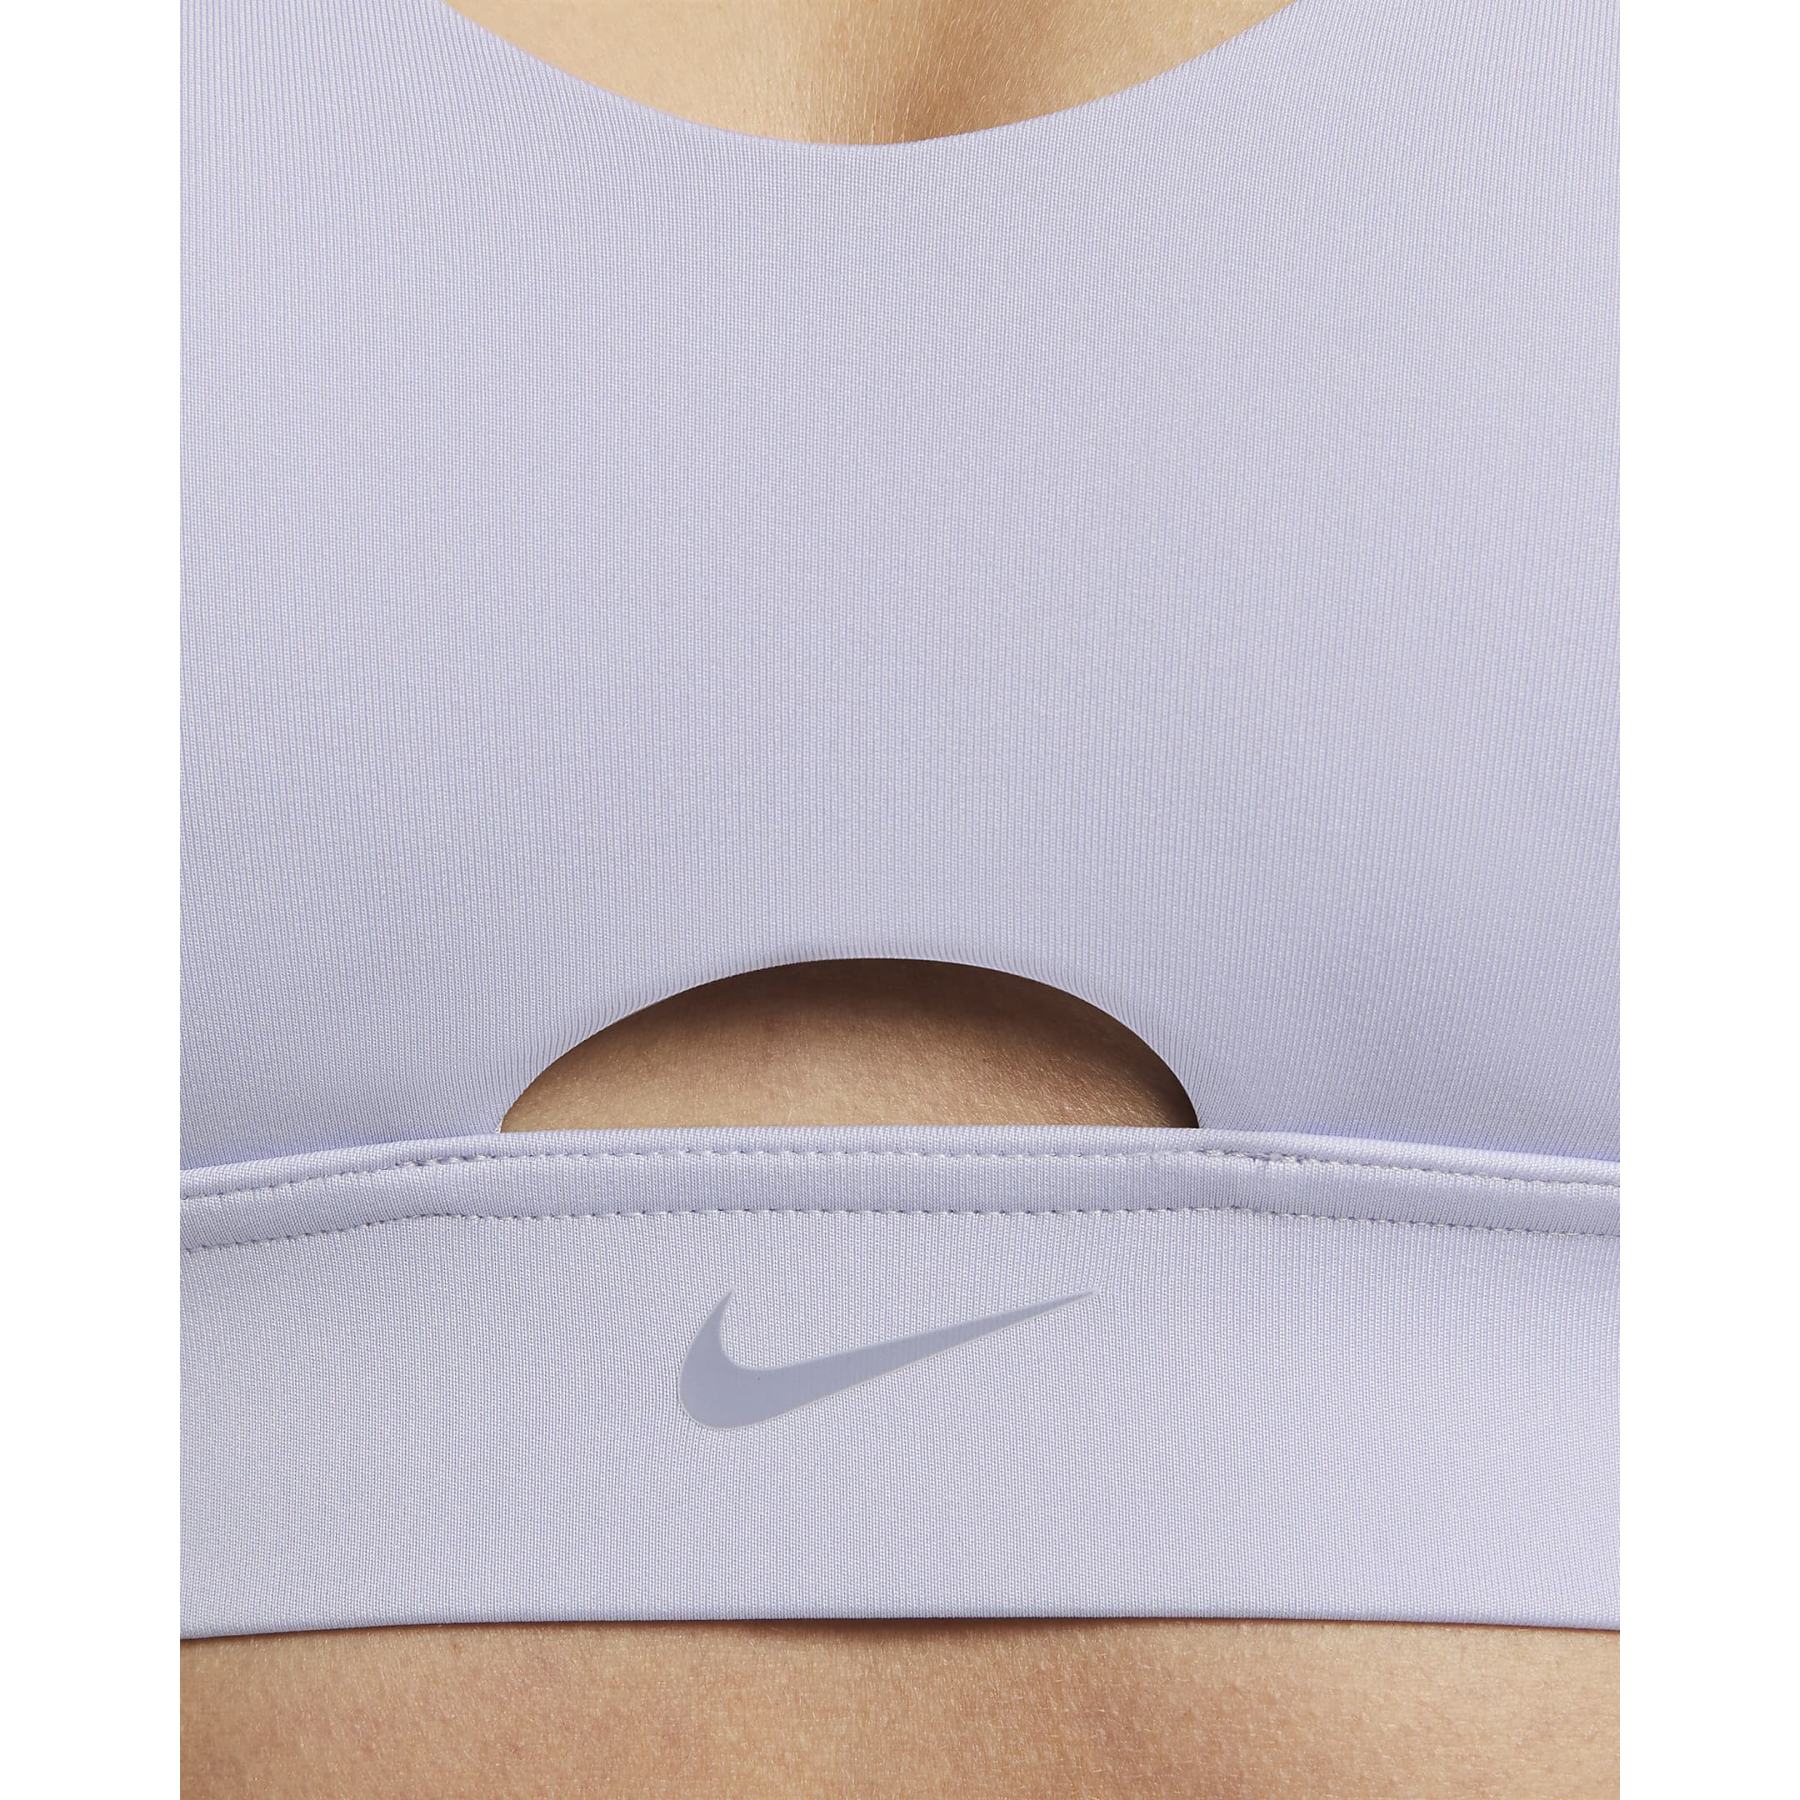 Nike Indy Plunge Cutout Sports Bra with medium support Women